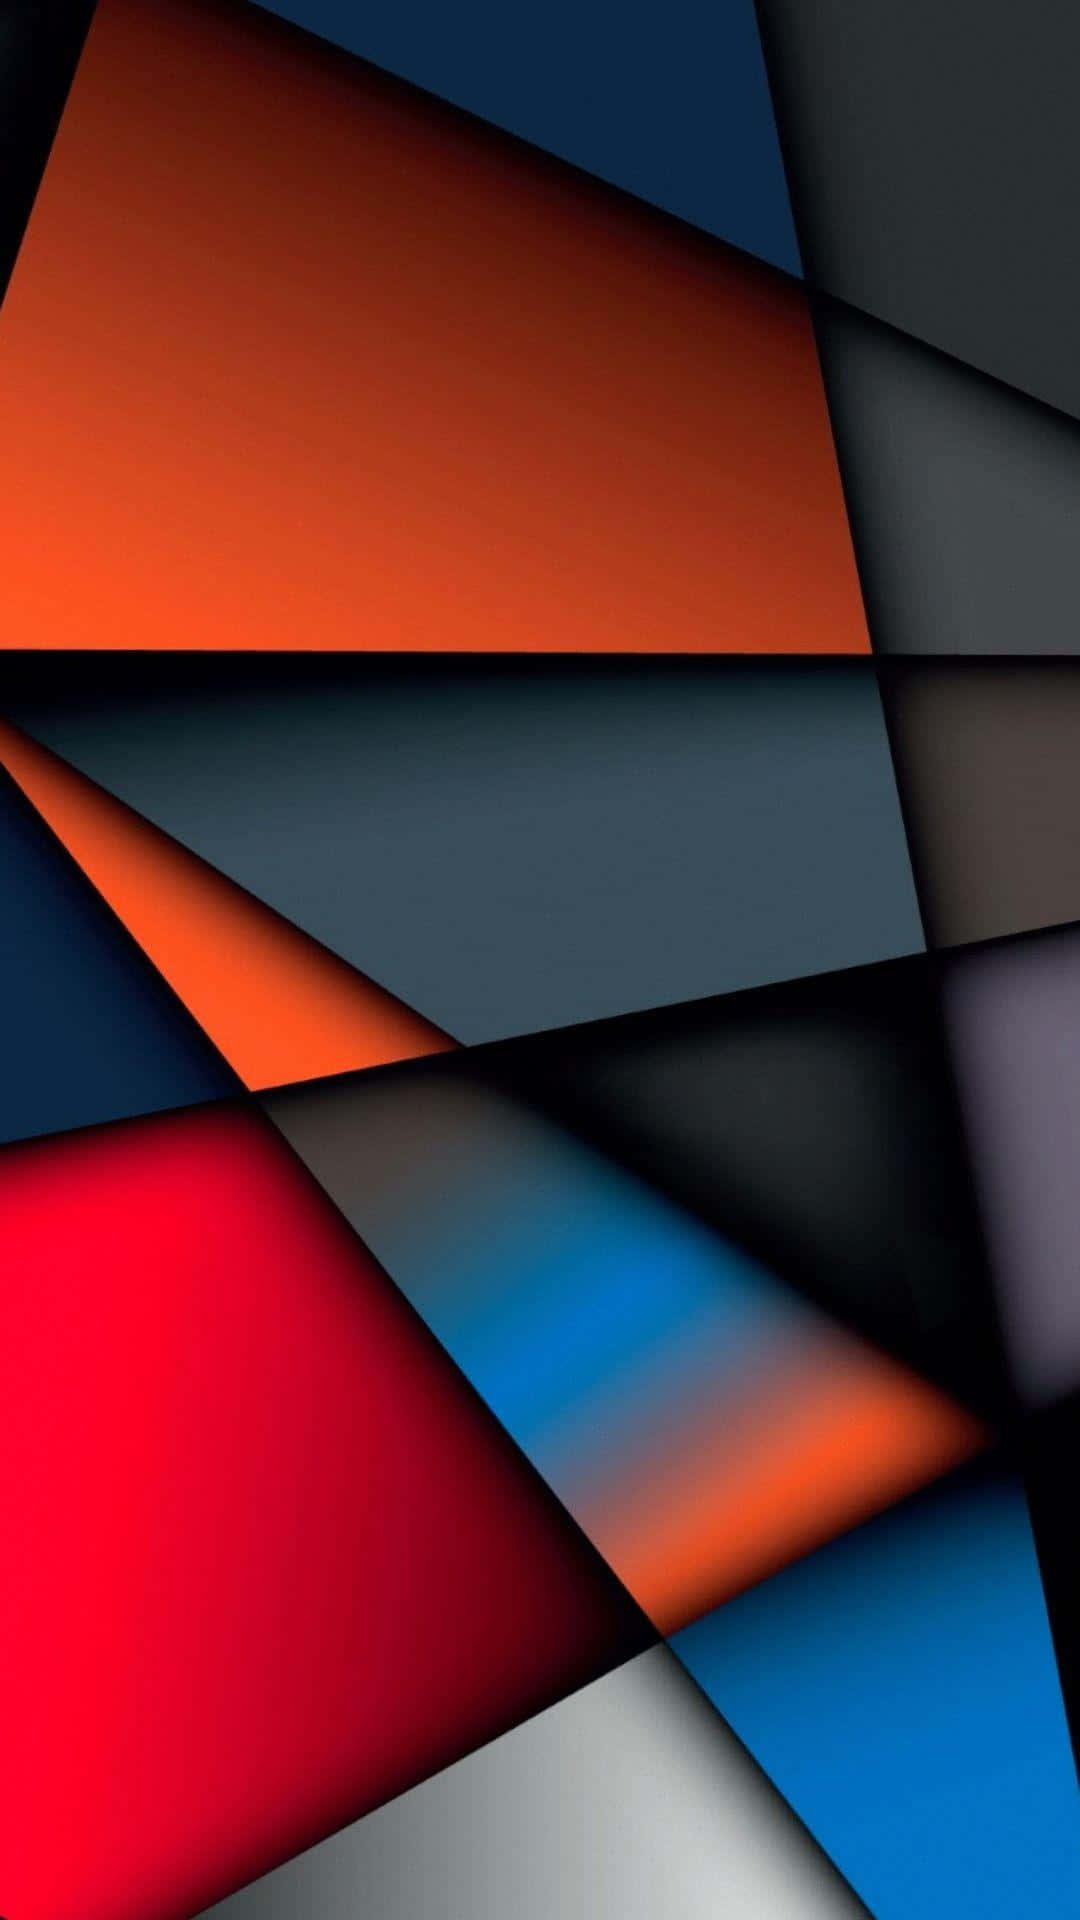 Abstract Geometric Shapes In Blue, Orange, And Black